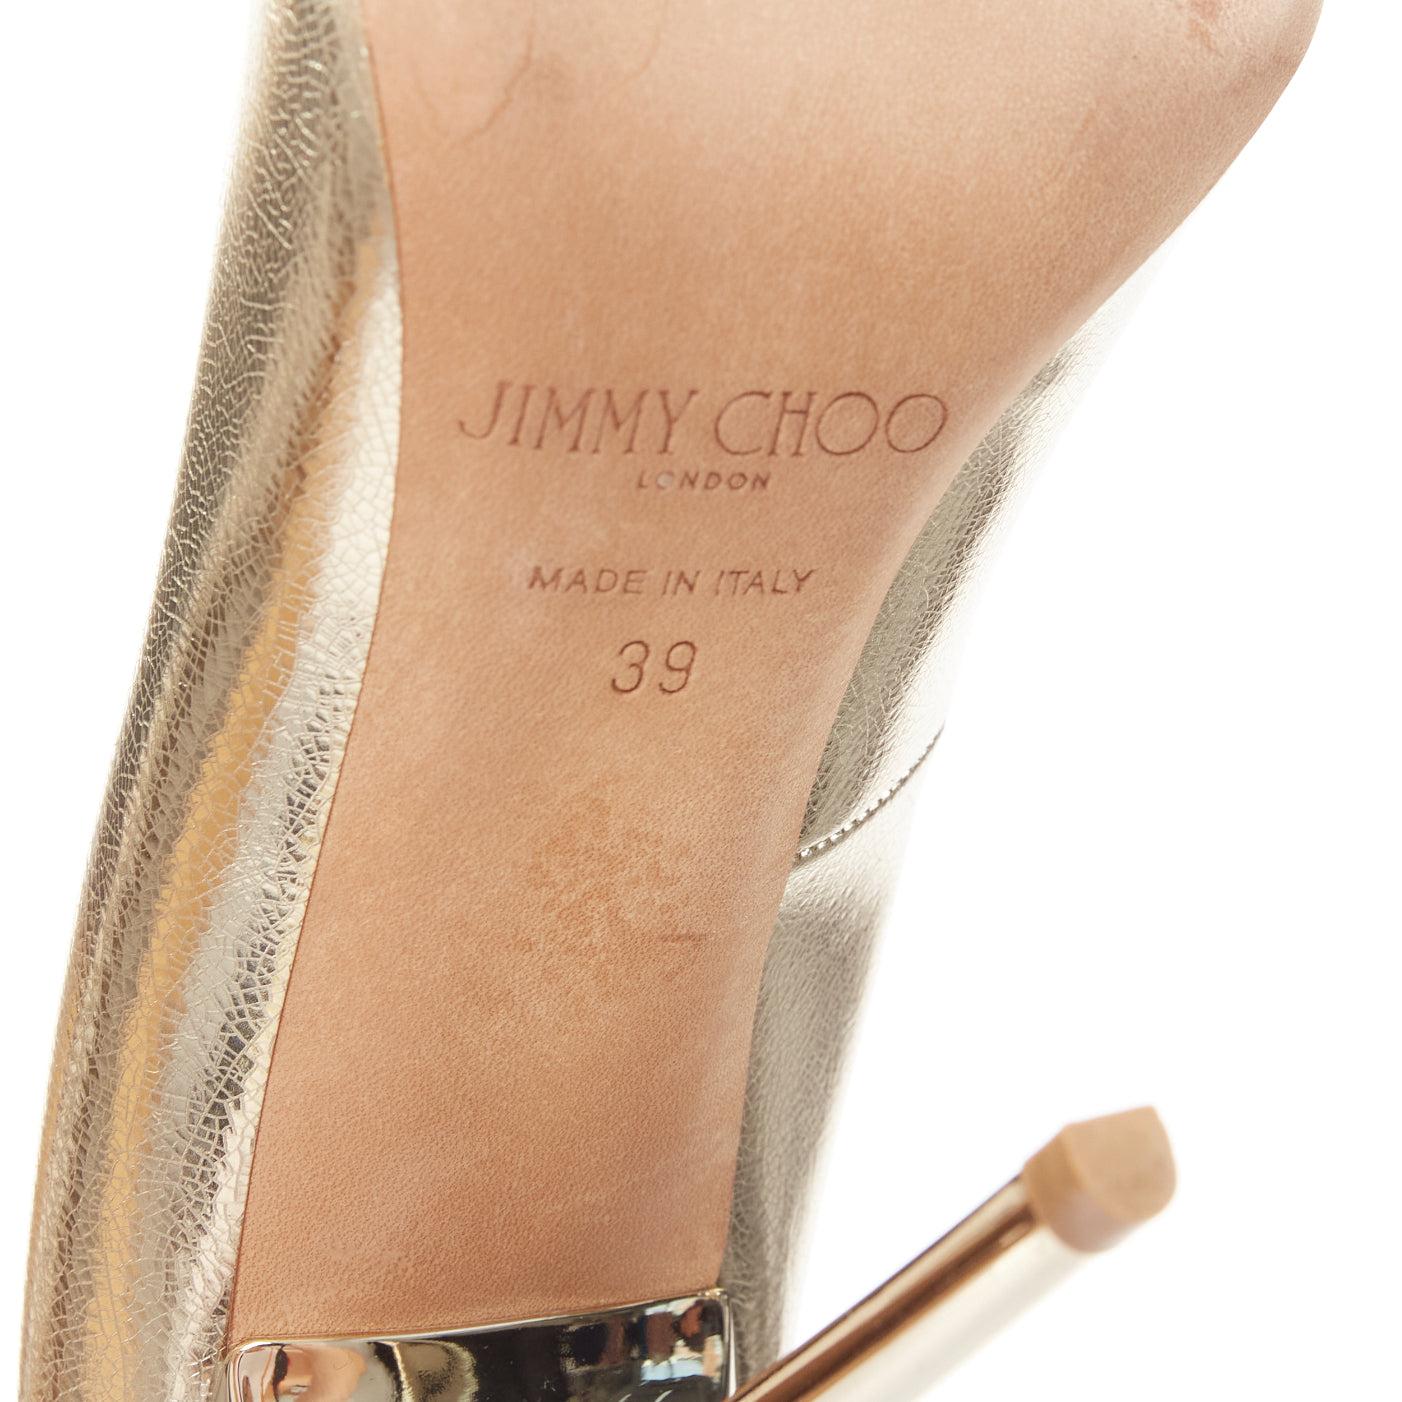 JIMMY CHOO Anouk gold metallic leather classic pointy toe stiletto pumps EU39 For Sale 6